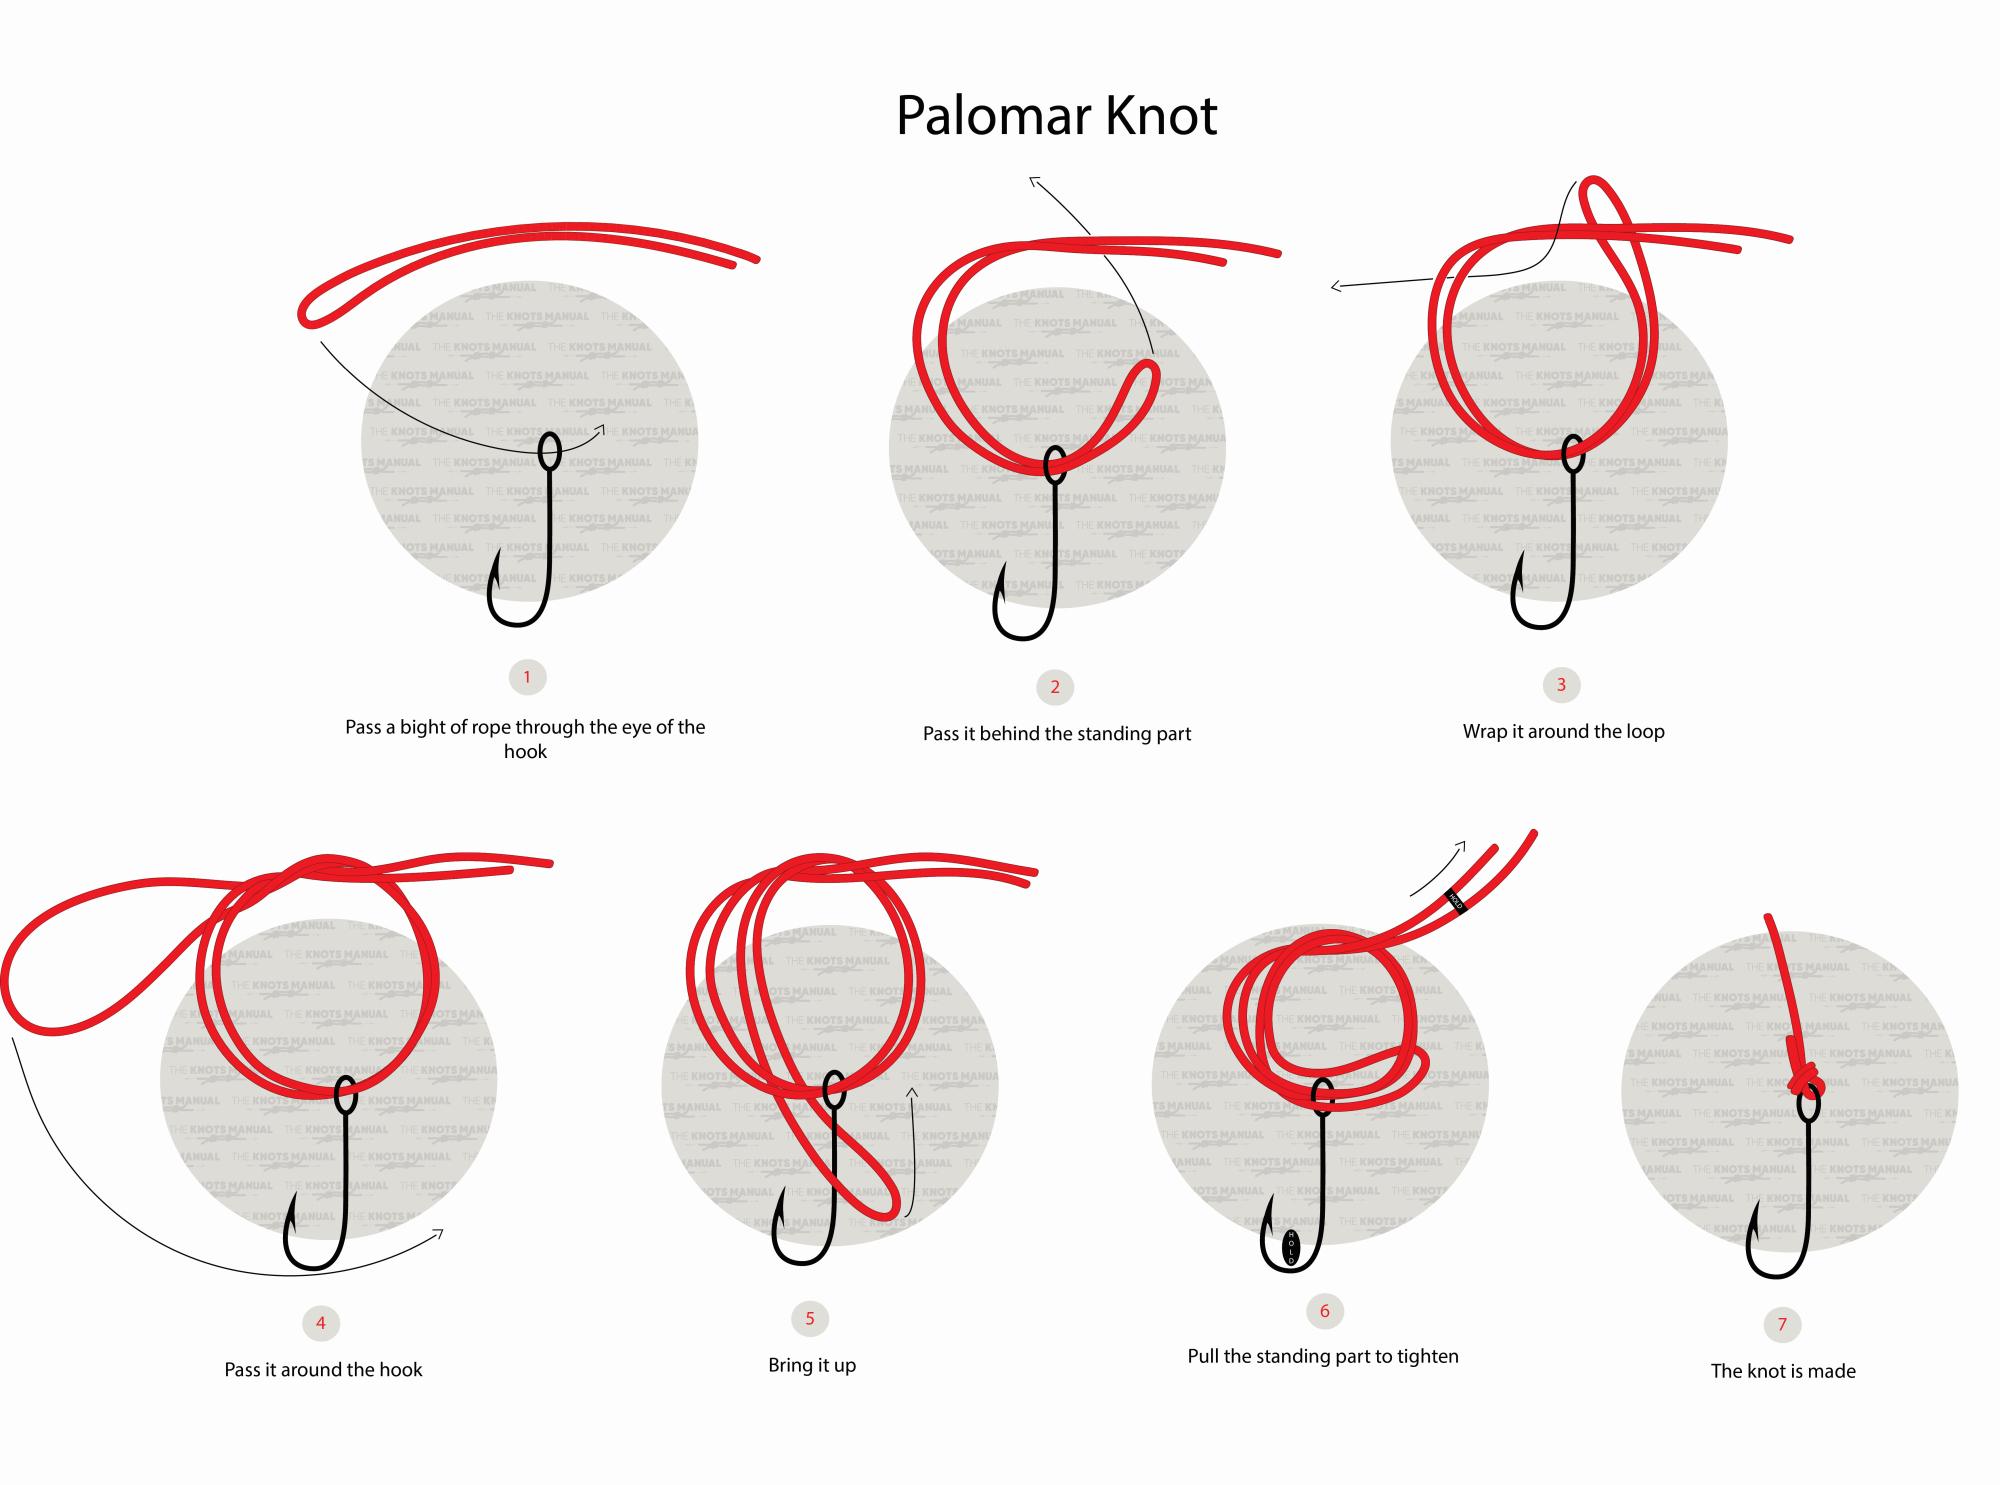 Plomar Knot Step by step